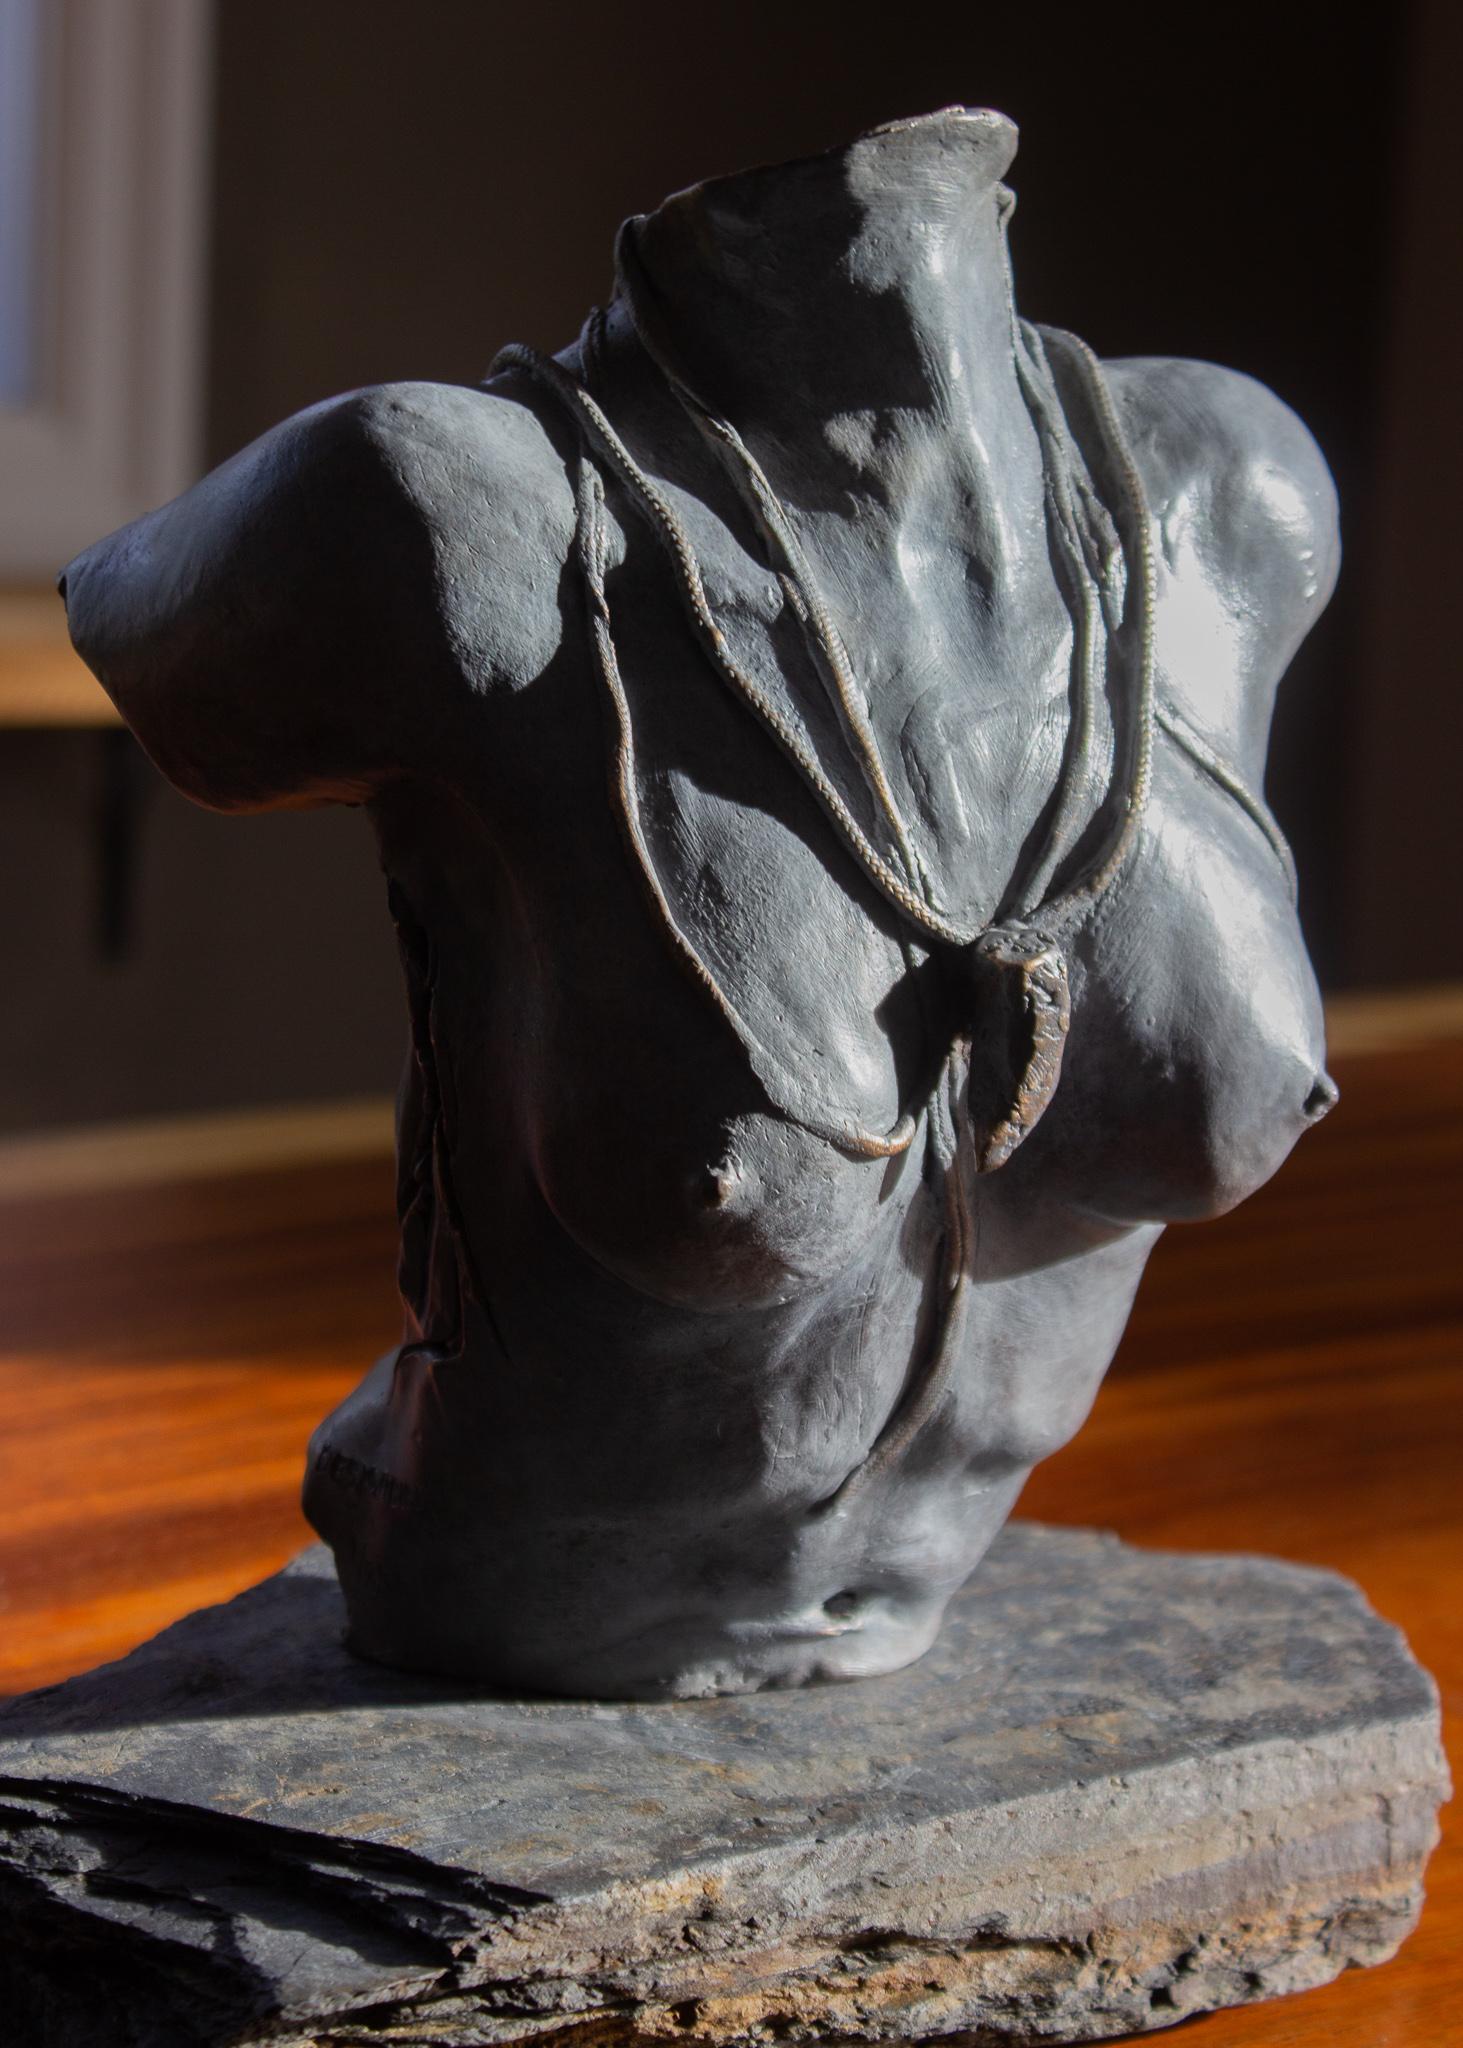 L'amoureuse - The Lover, Limited Edition, Bronze Sculpture by Desjardins